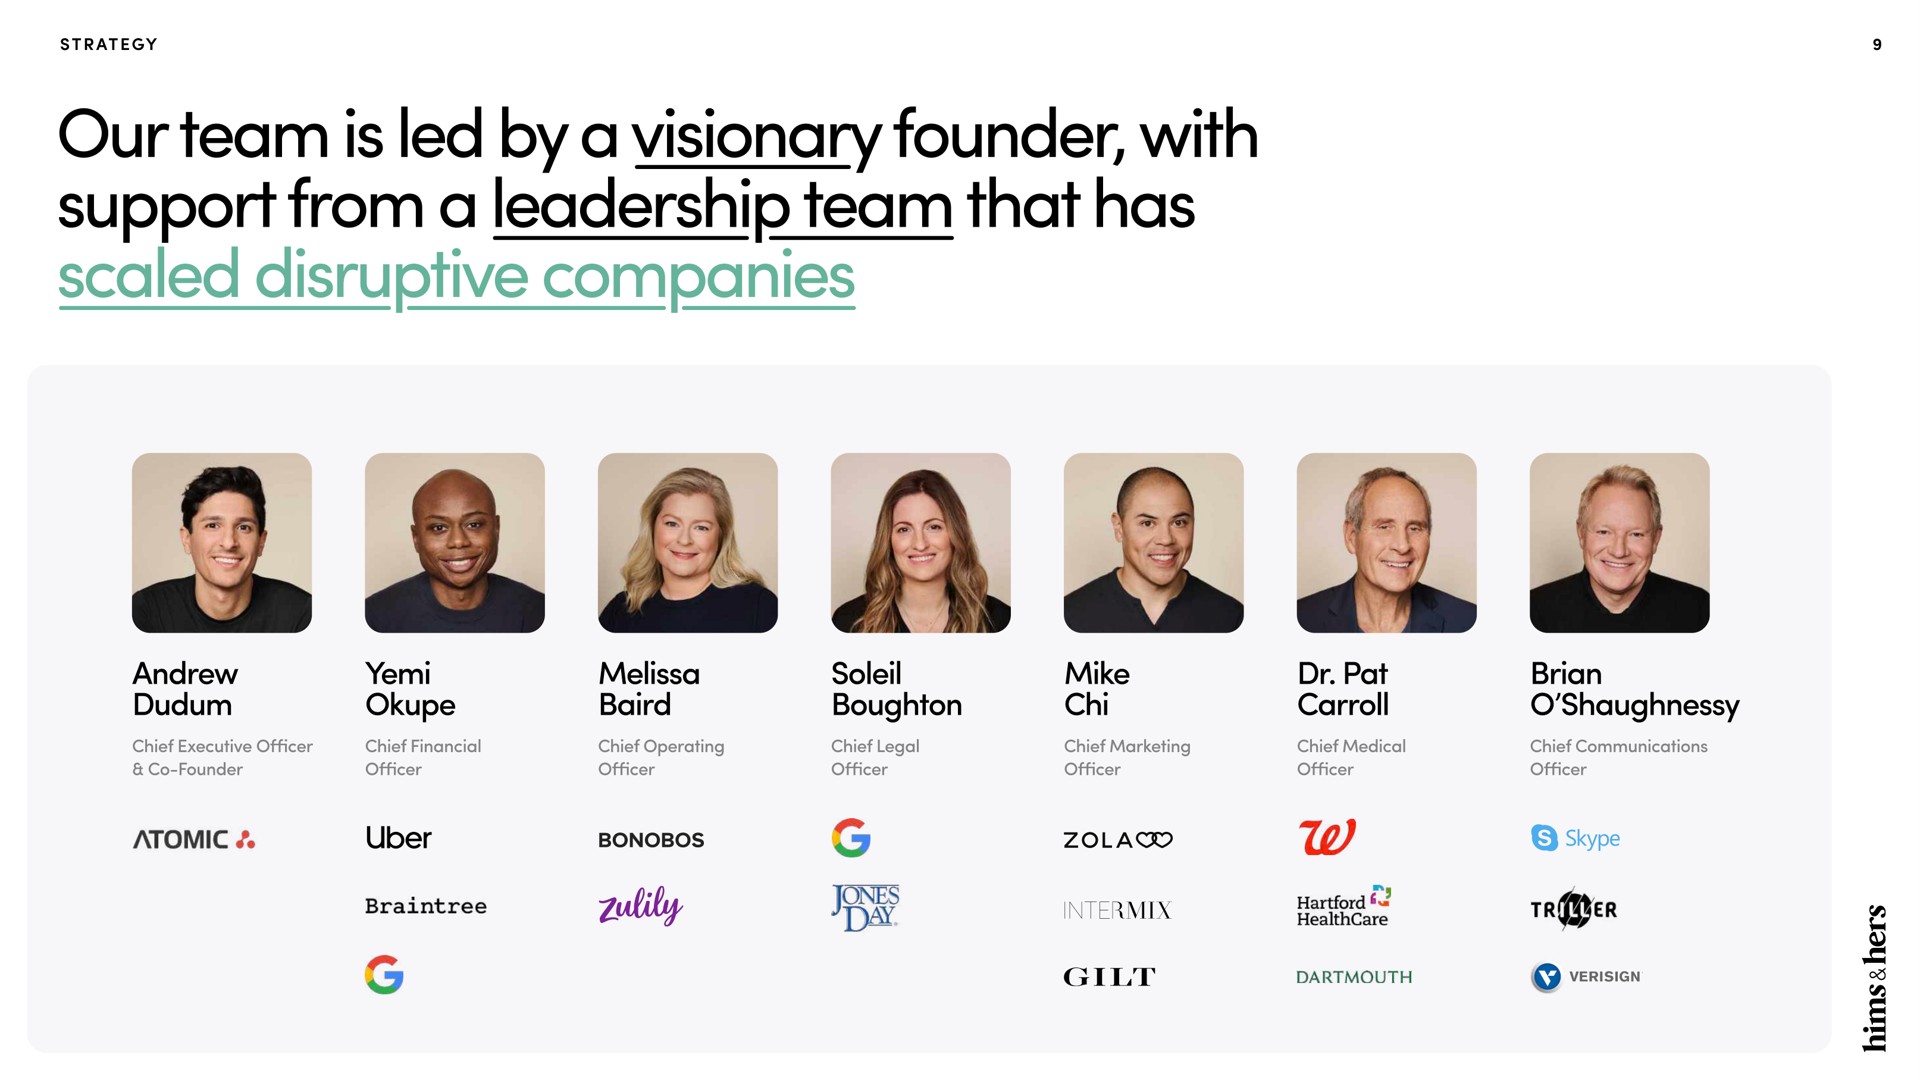 our team is led by a visionary founder with support from a leadership team that has | Hims & Hers